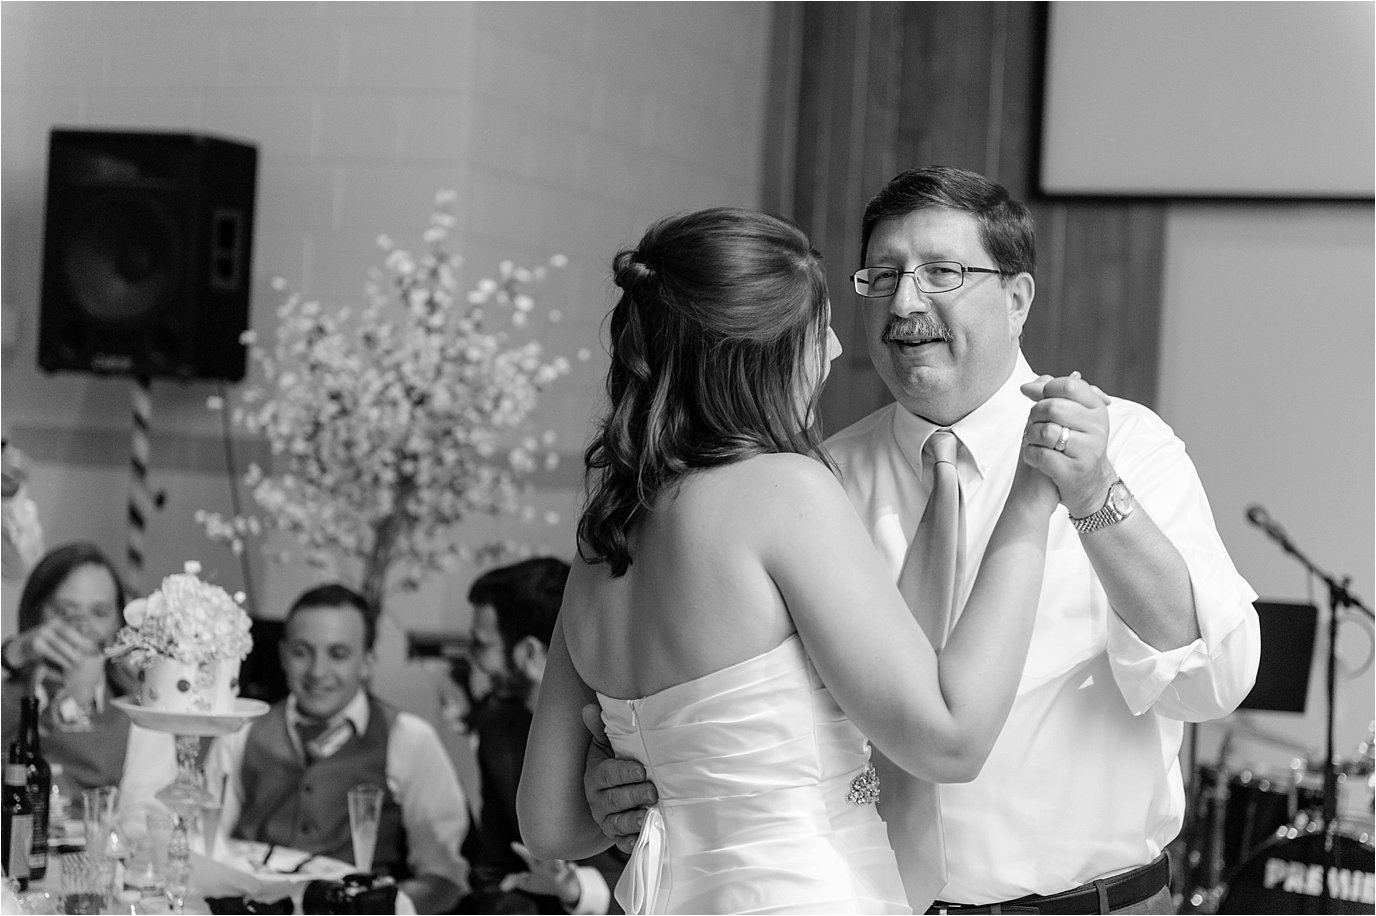 Michelle dances with her dad